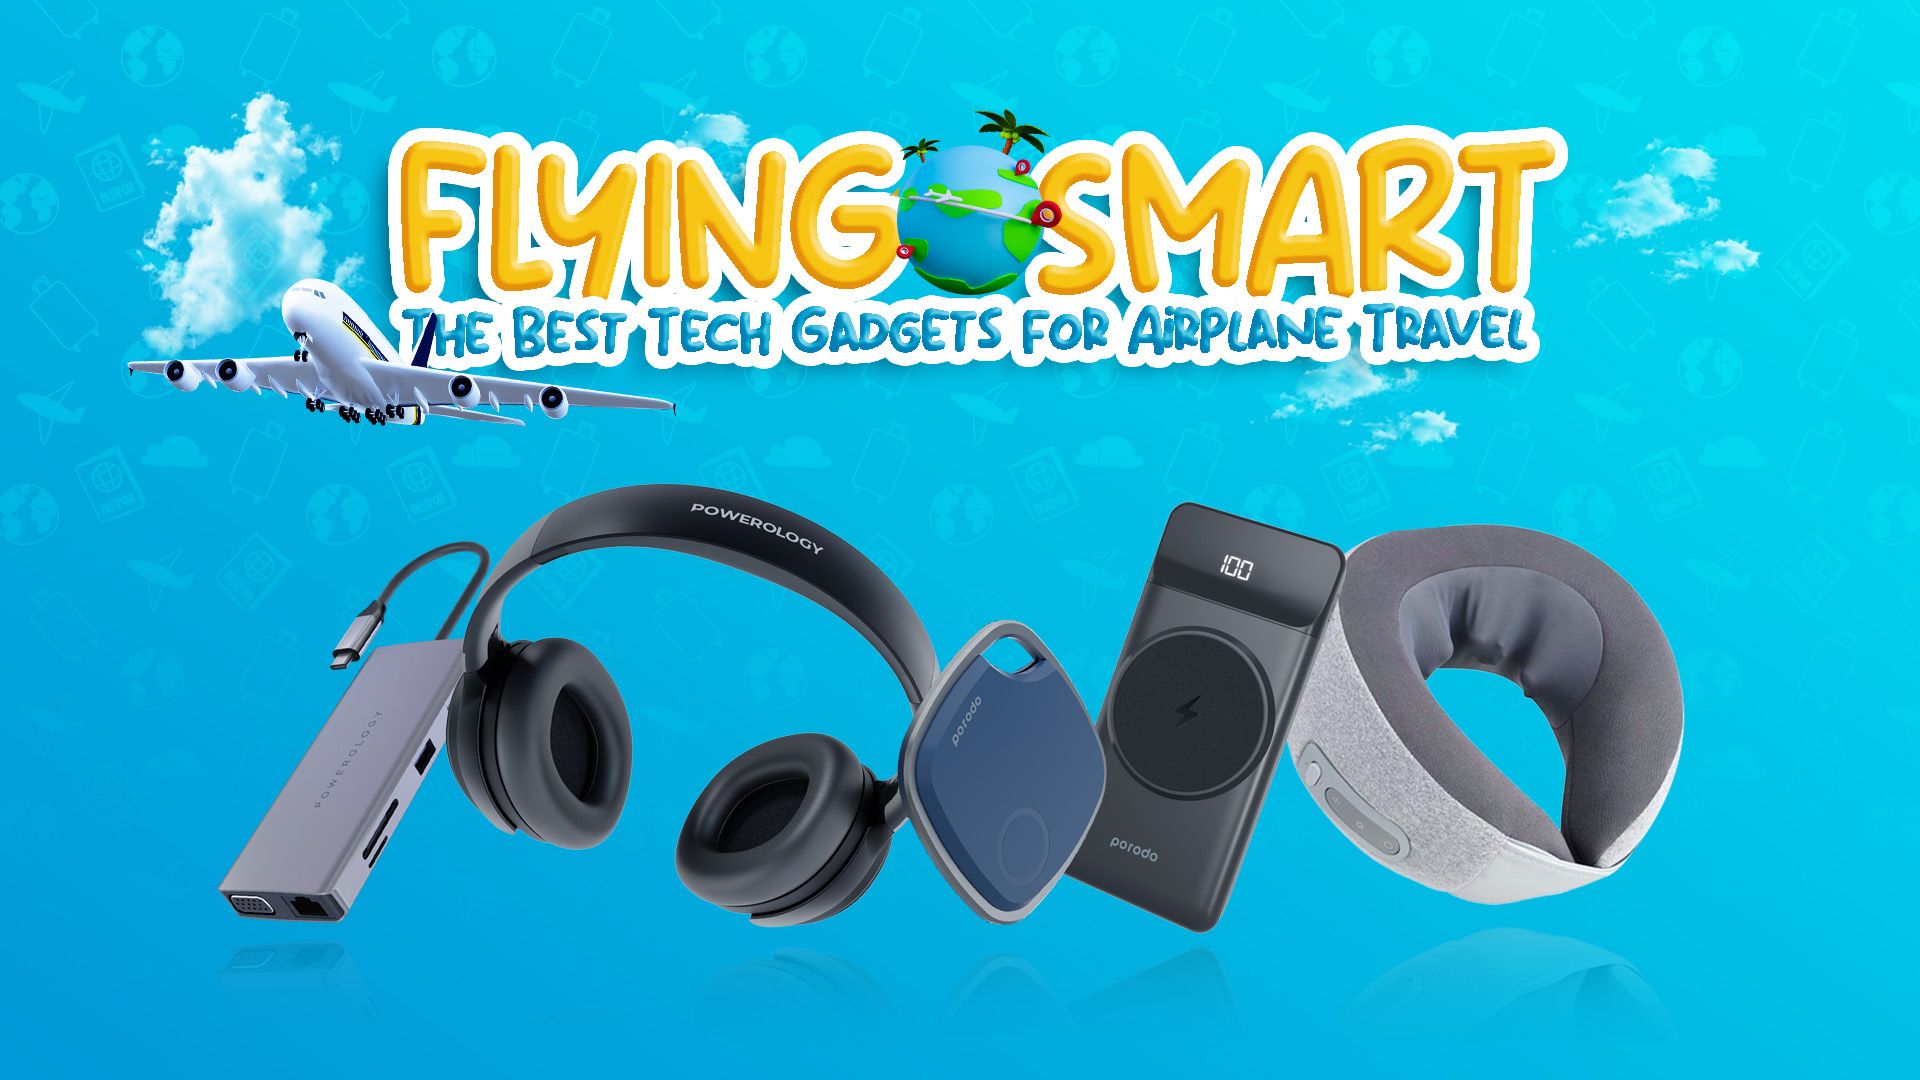 Flying Smart: The Best Tech Gadgets for Airplane Travel